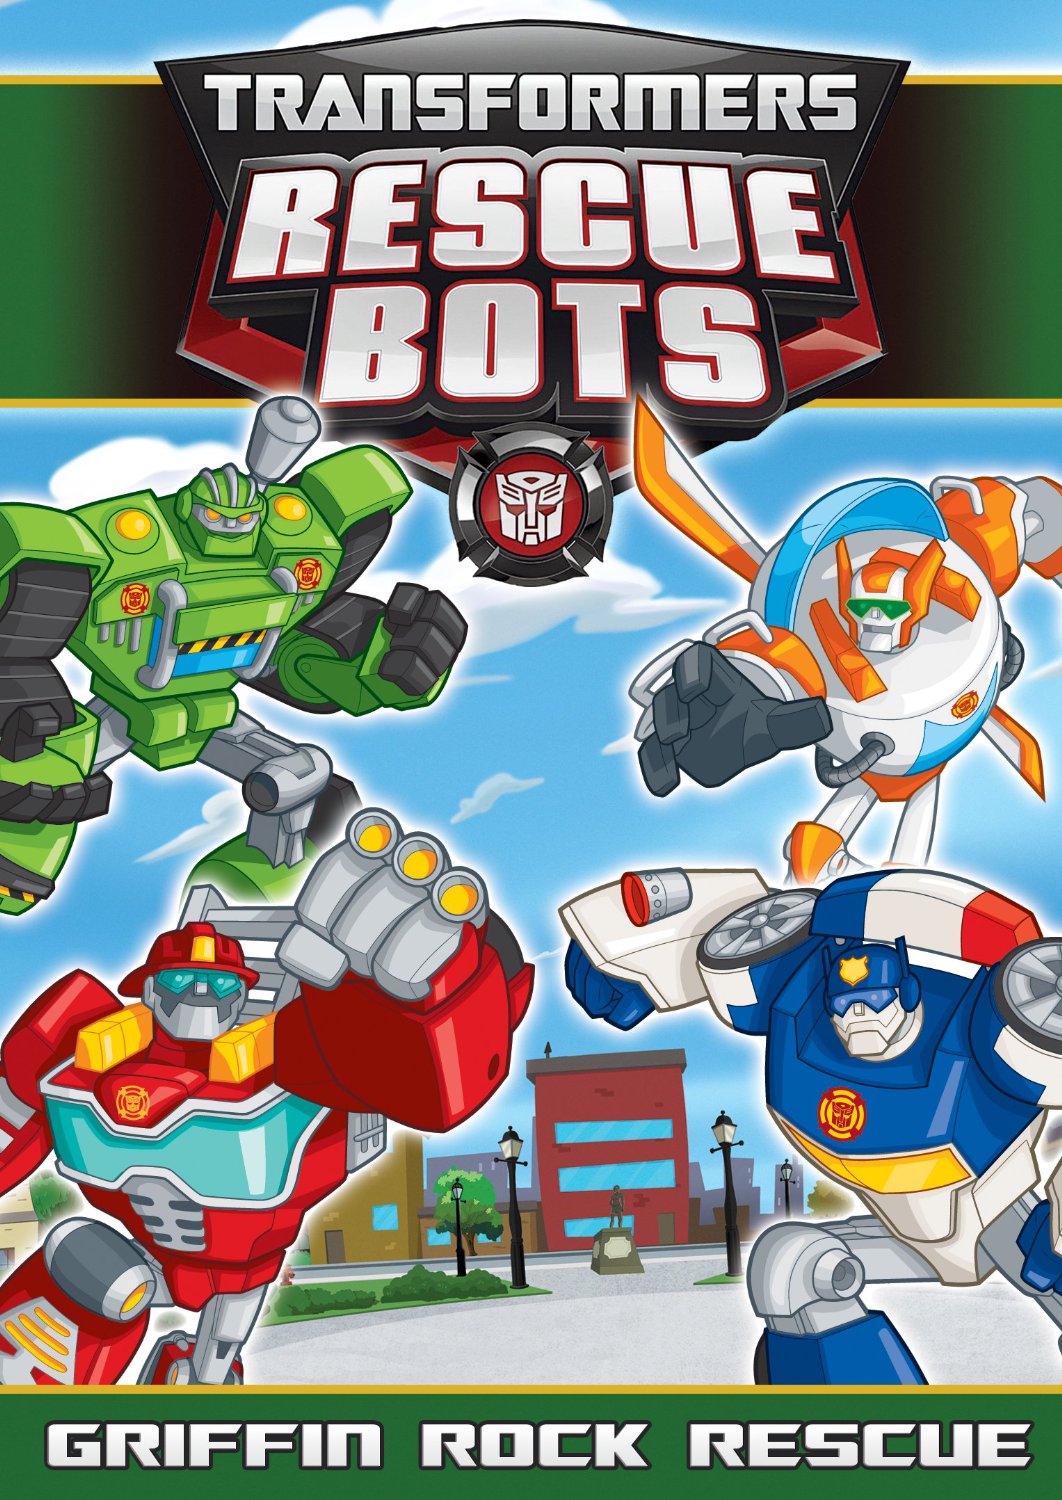 Re: Transformers Rescue Bots: Griffin Rock Rescue DVD Listed on Amazon